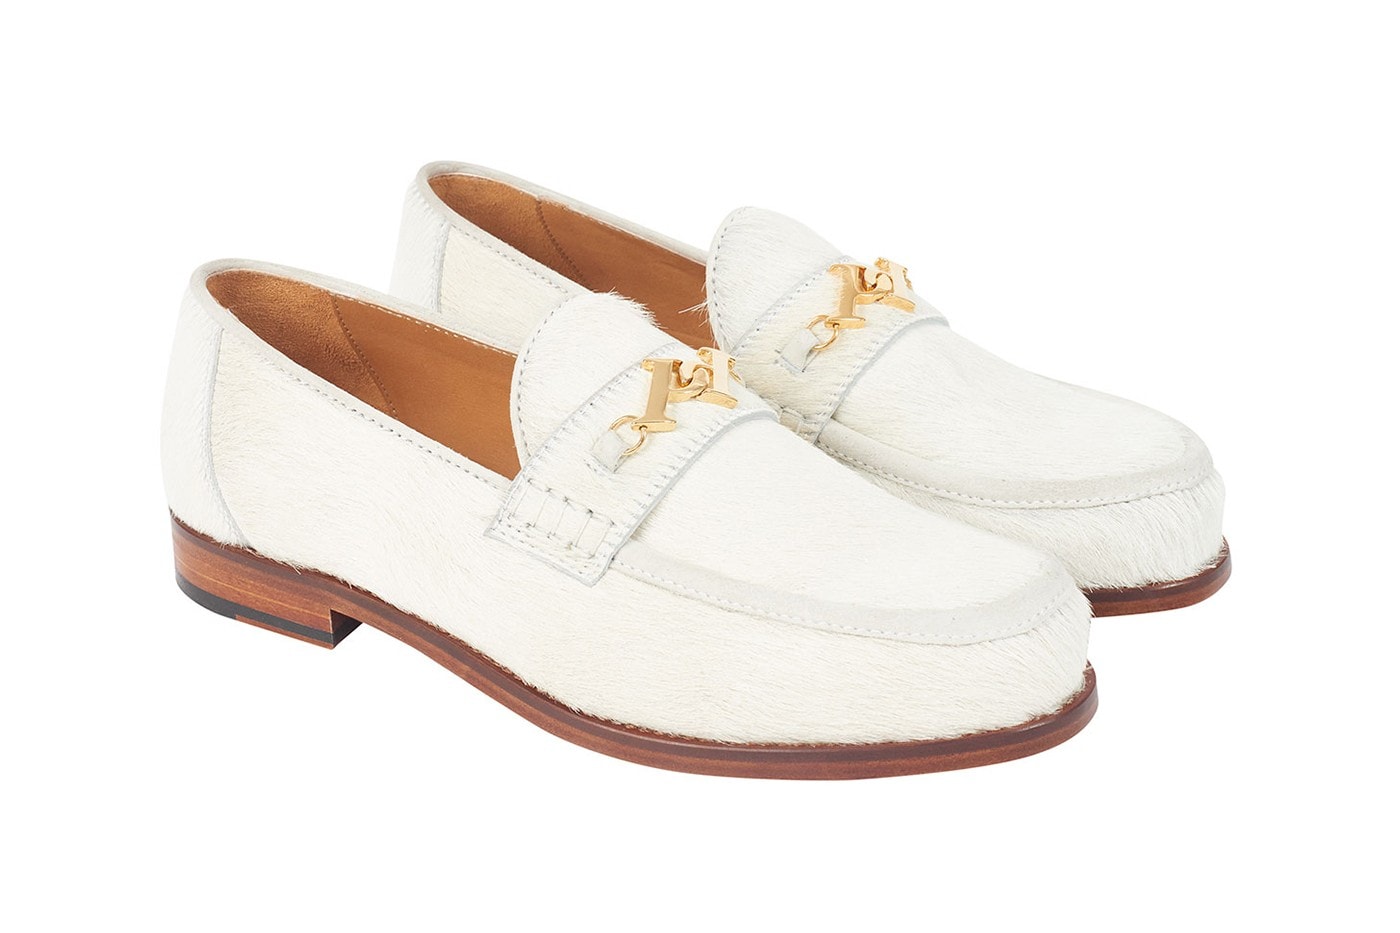 Palace Summer 2019 Collection Loafers Cream